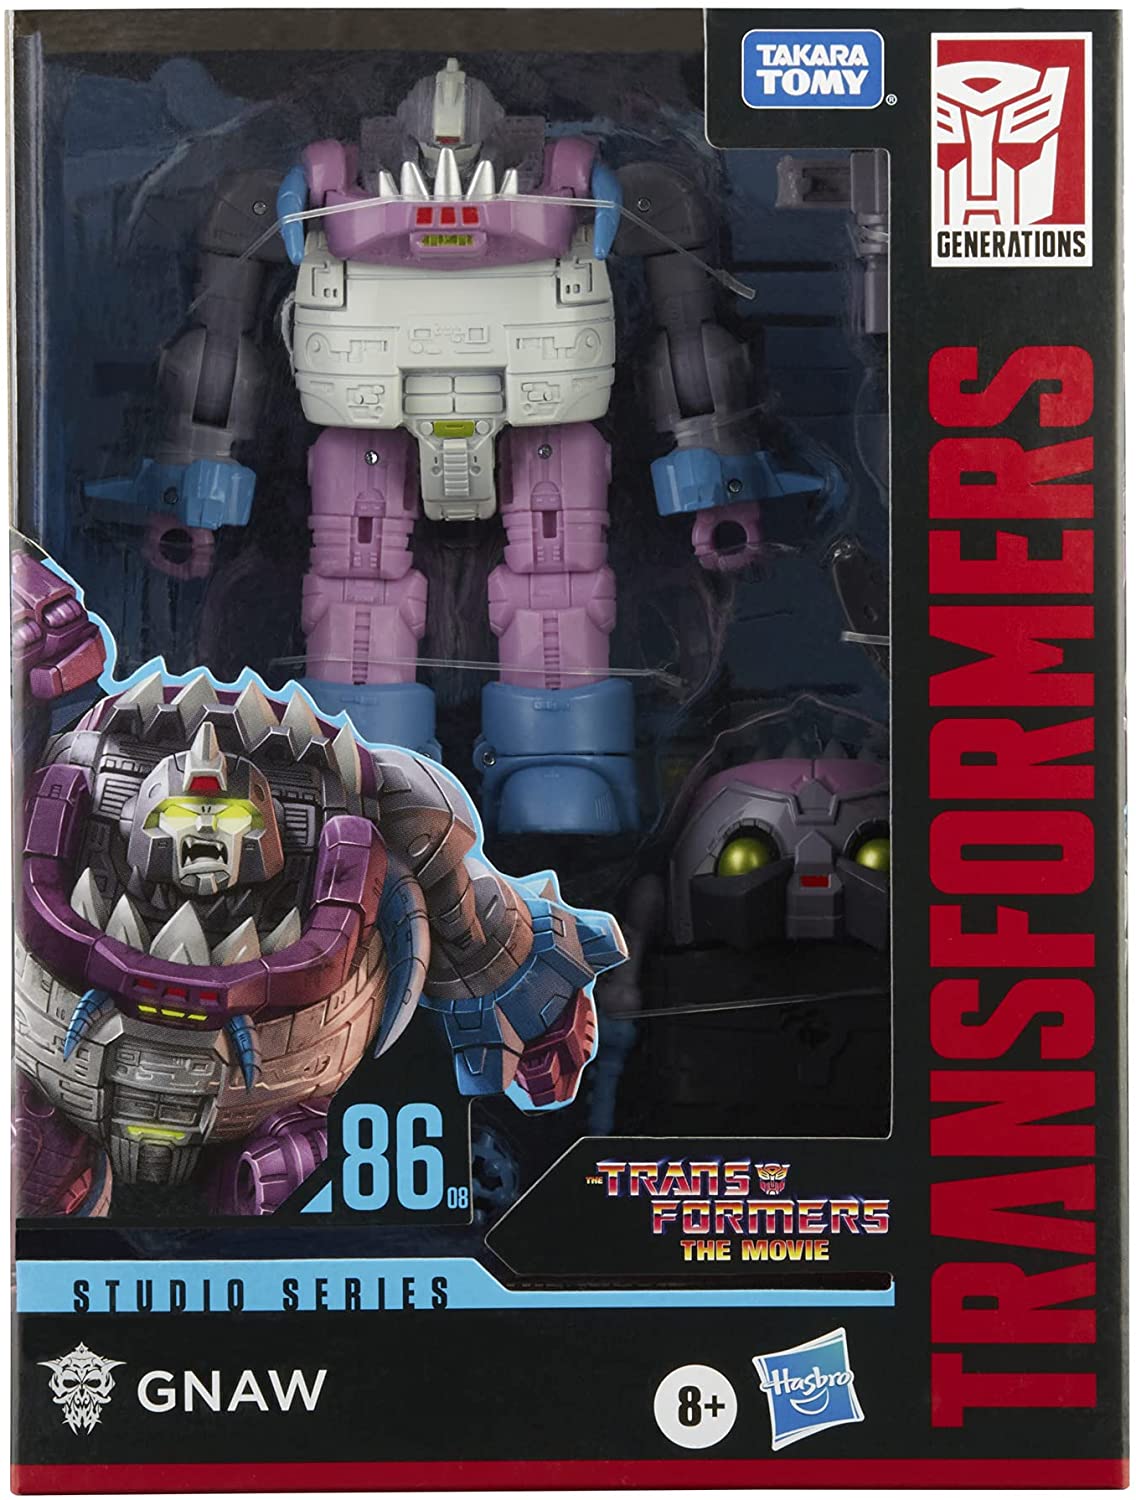 Transformers Toys Studio Series 86-08 Deluxe Class The Movie 1986 Gnaw Action Figure